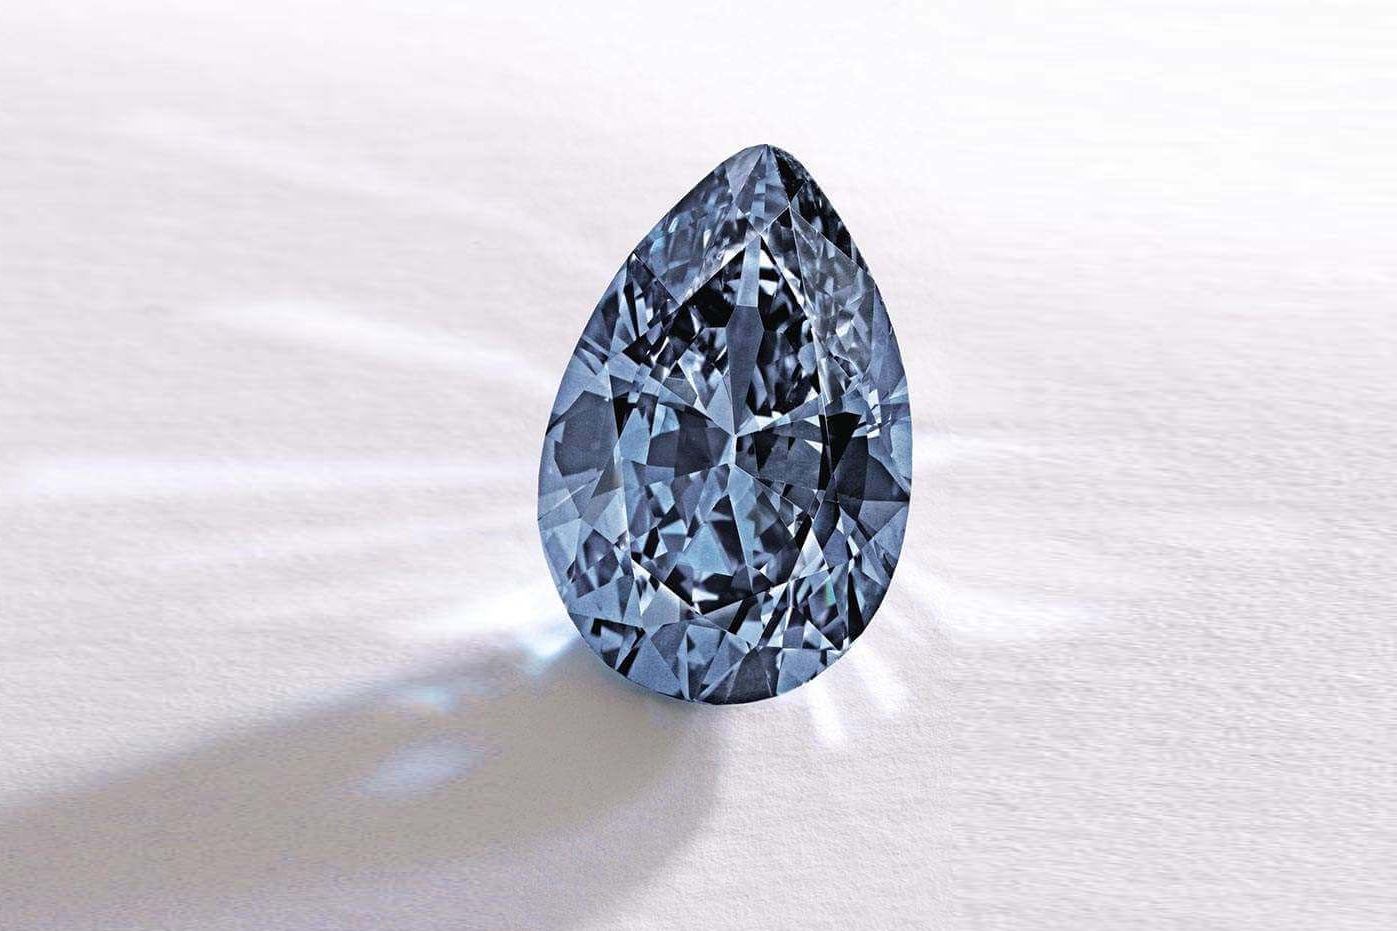 This 9.75 carat fancy vivid blue diamond was sold by Sotheby's New York and was renamed ‘The Zoe Diamond’